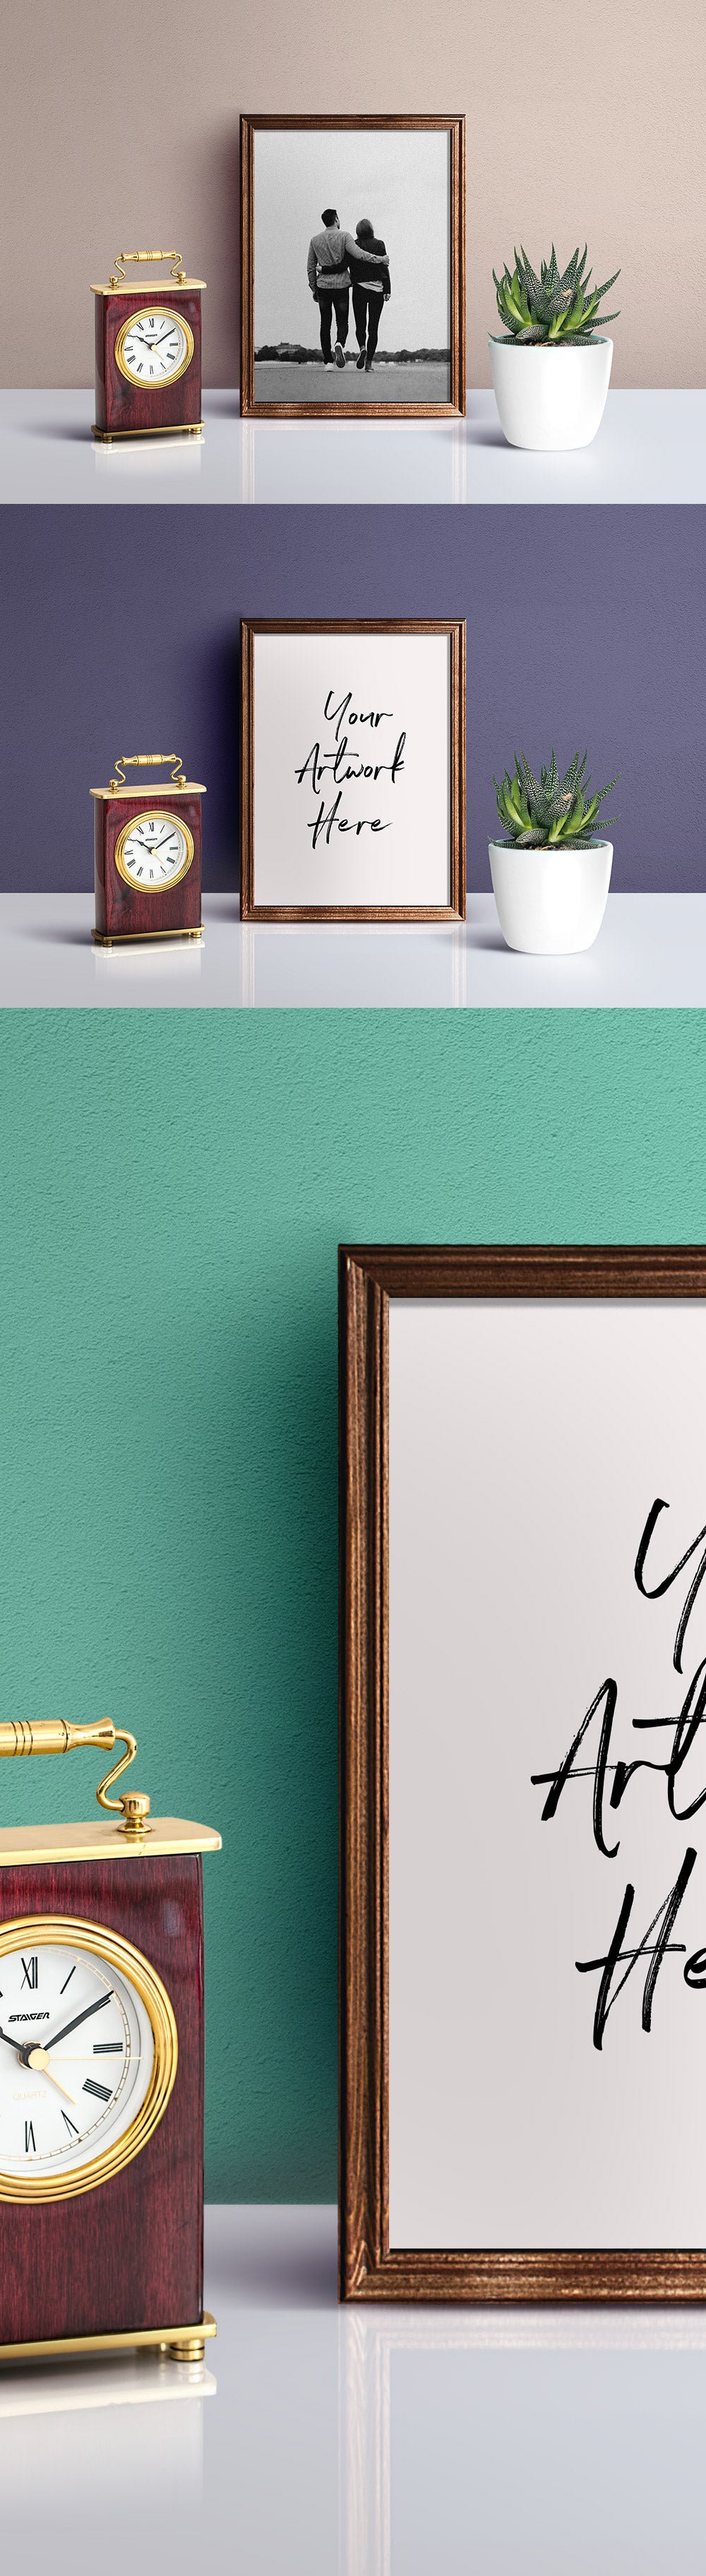 Free Old Fashion Picture Frame Mockup PSD